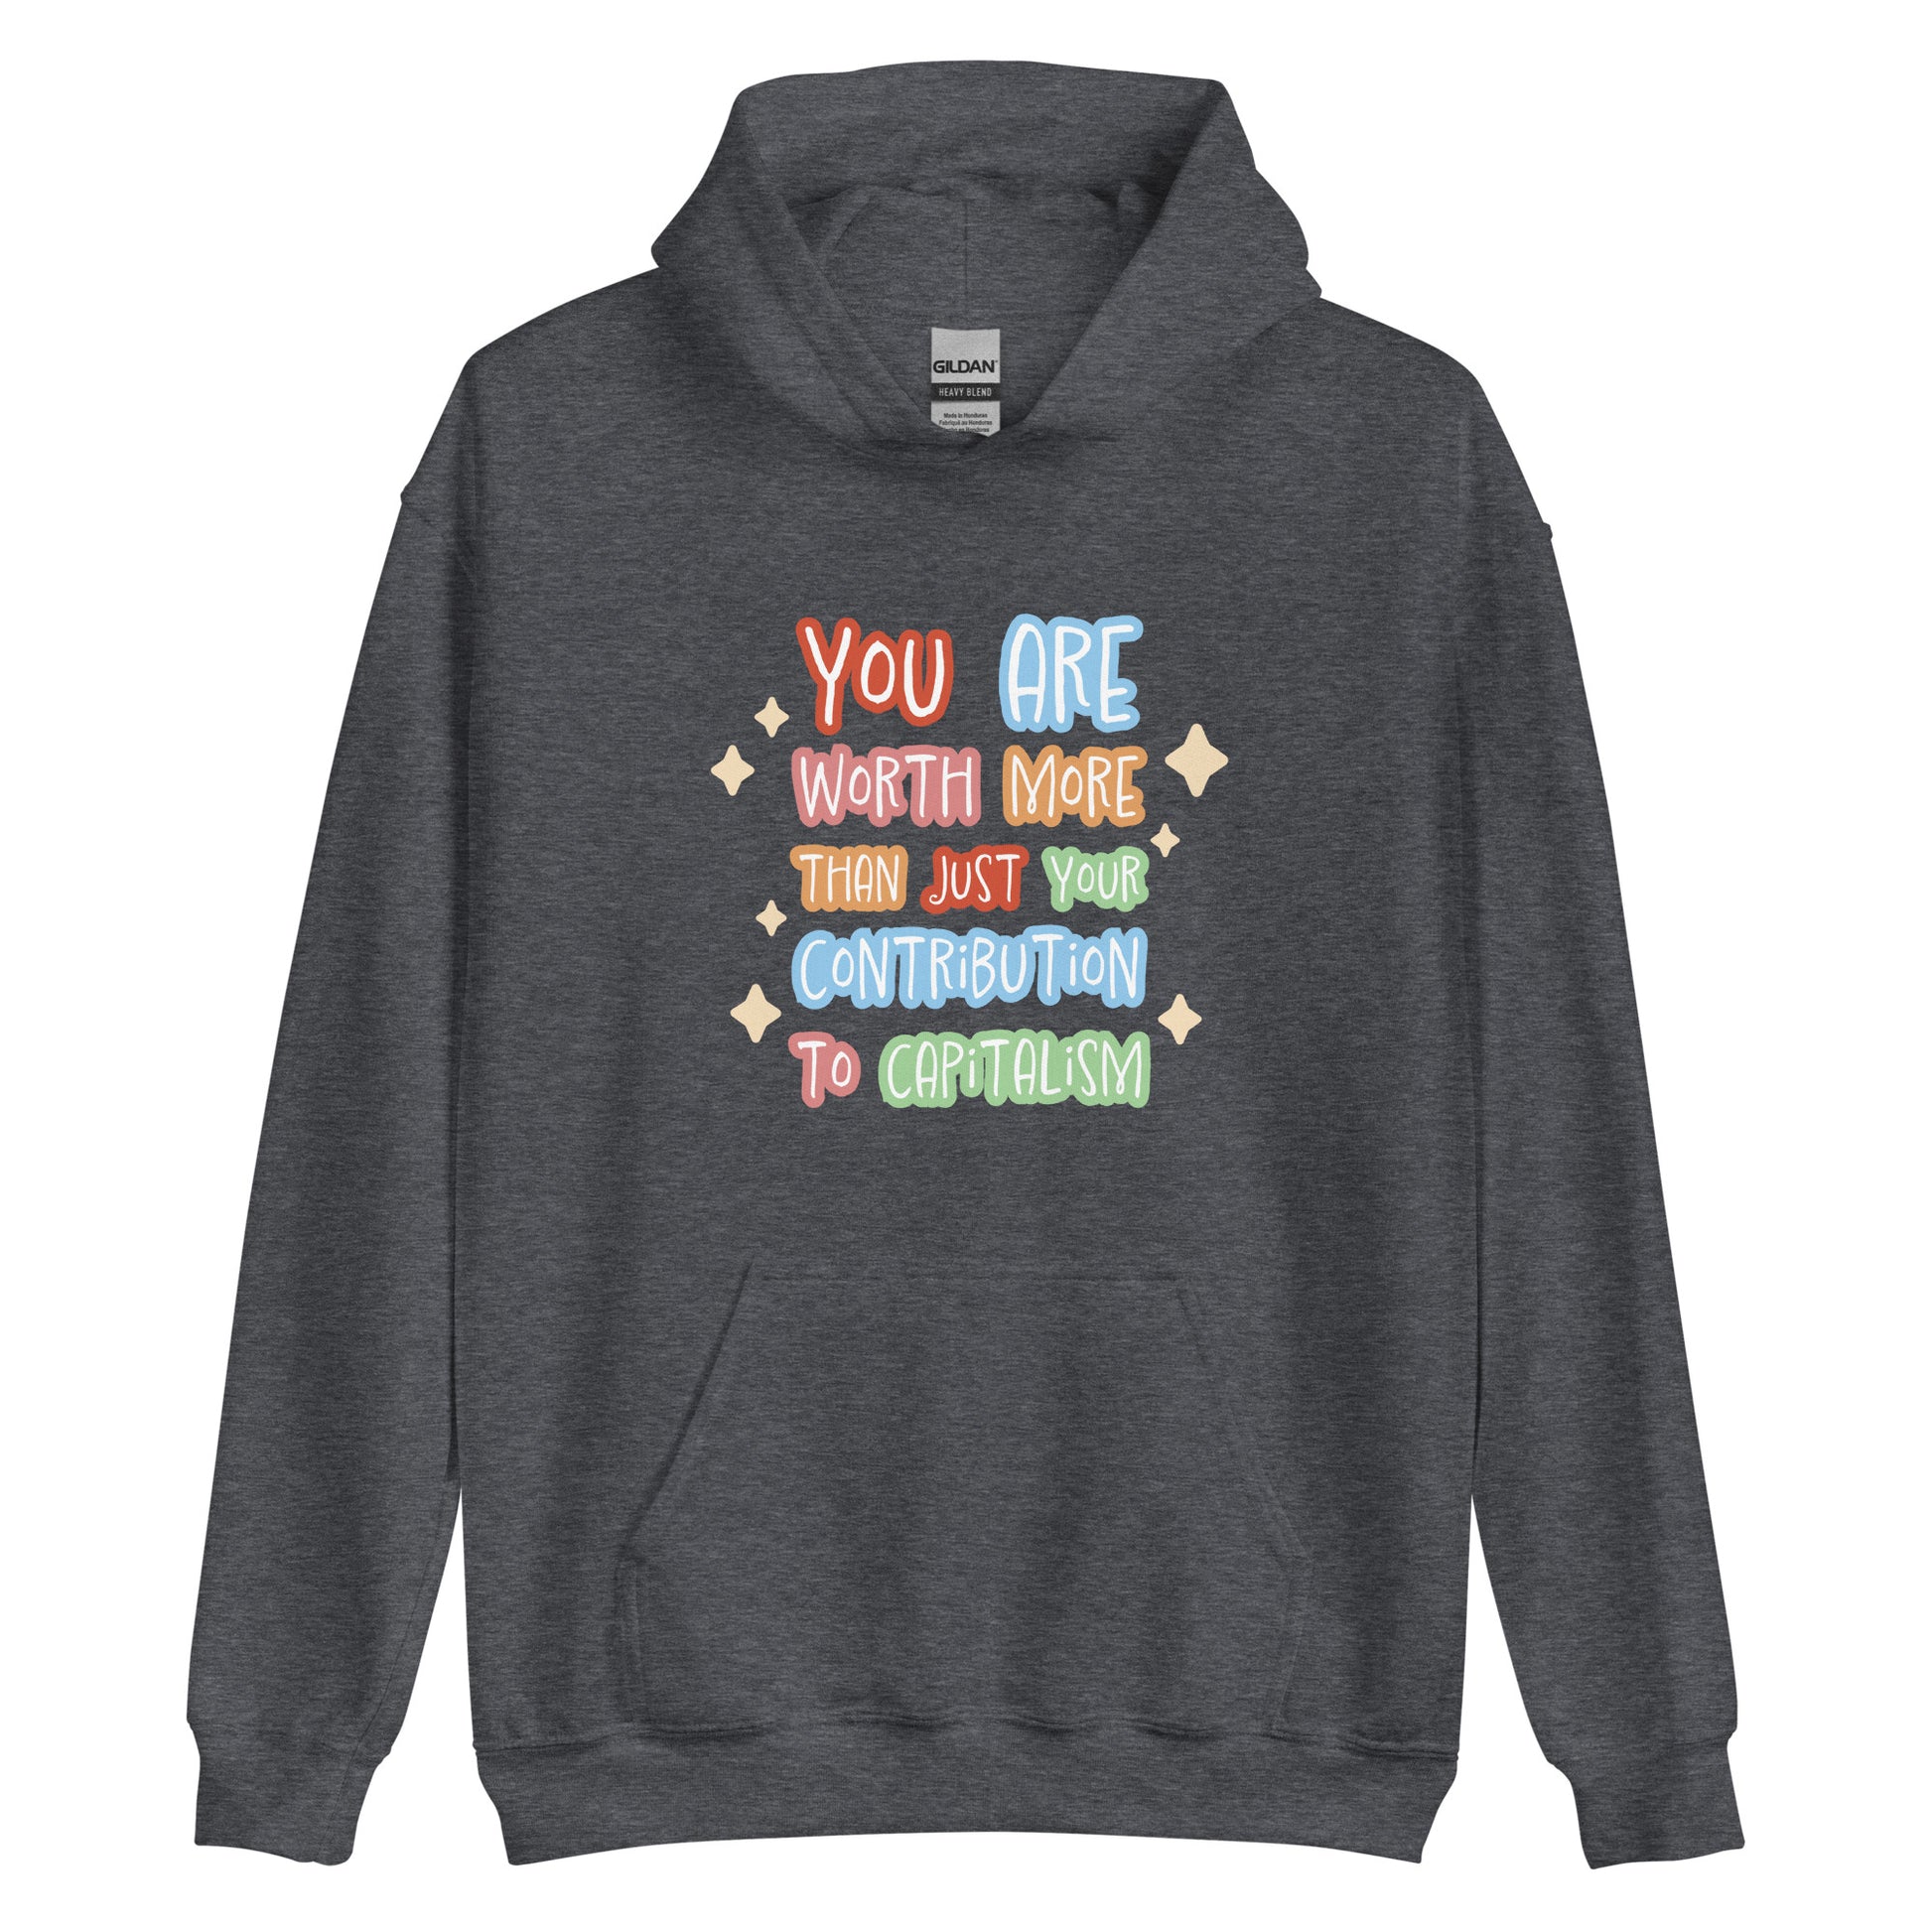 A heathered grey hooded sweatshirt featuring colorful hand-written-style text that reads "You are worth more than just your contribution to capitalism". Sparkles surround the text on each side.